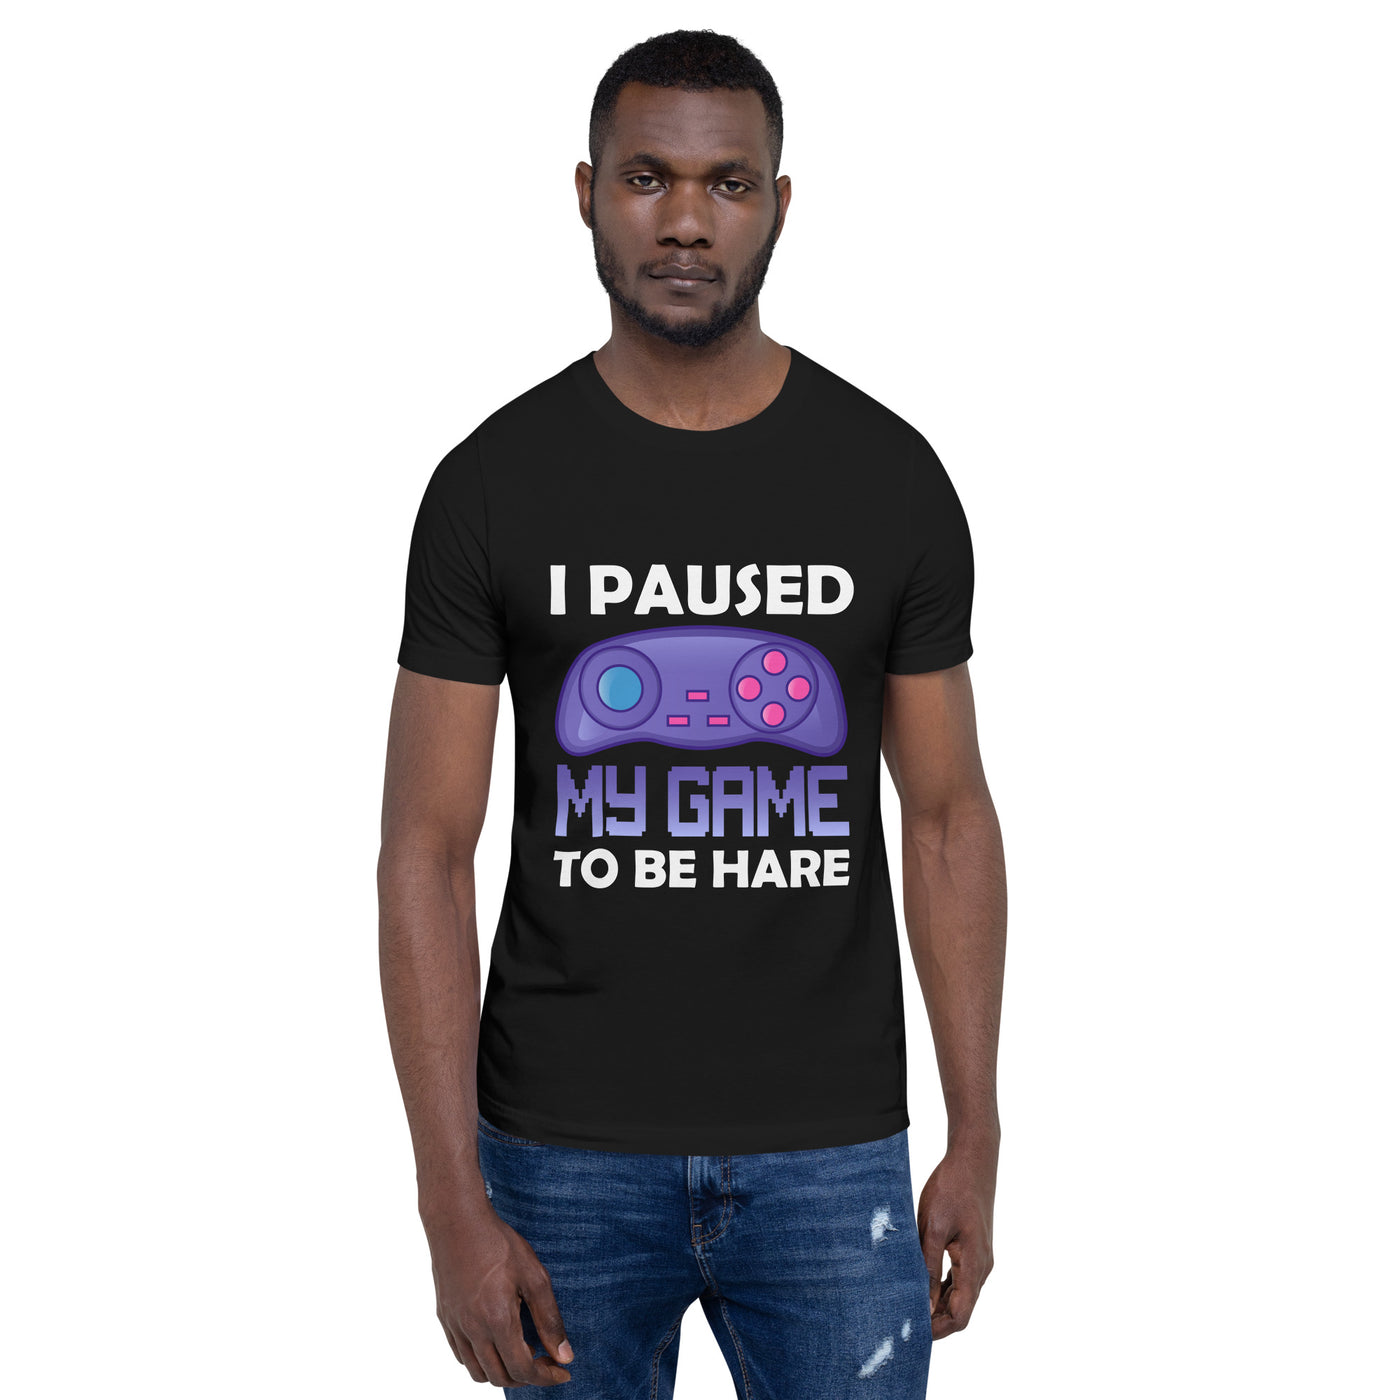 I Paused my Game to Be here (purple text ) - Unisex t-shirt